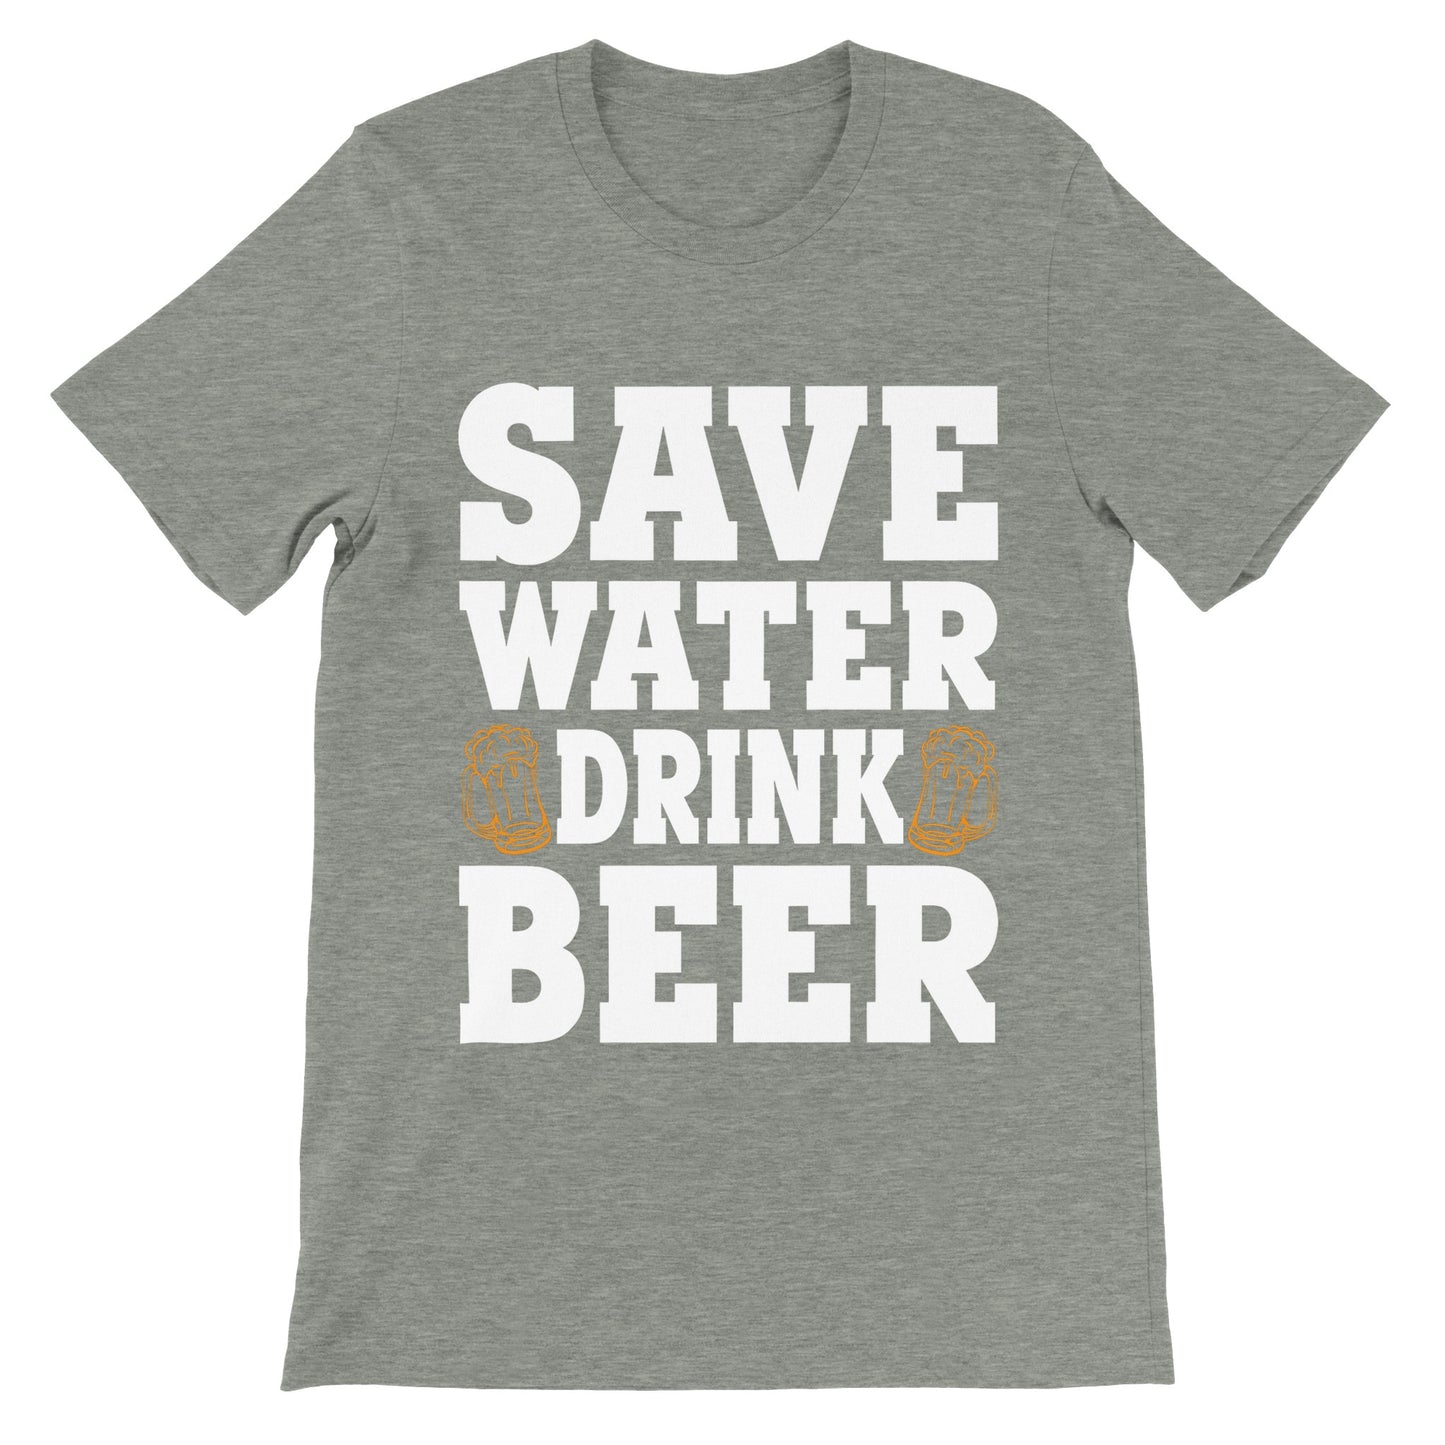 Funny T-Shirts - Save Water Drink Beer - Premium Unisex T-Shirt 